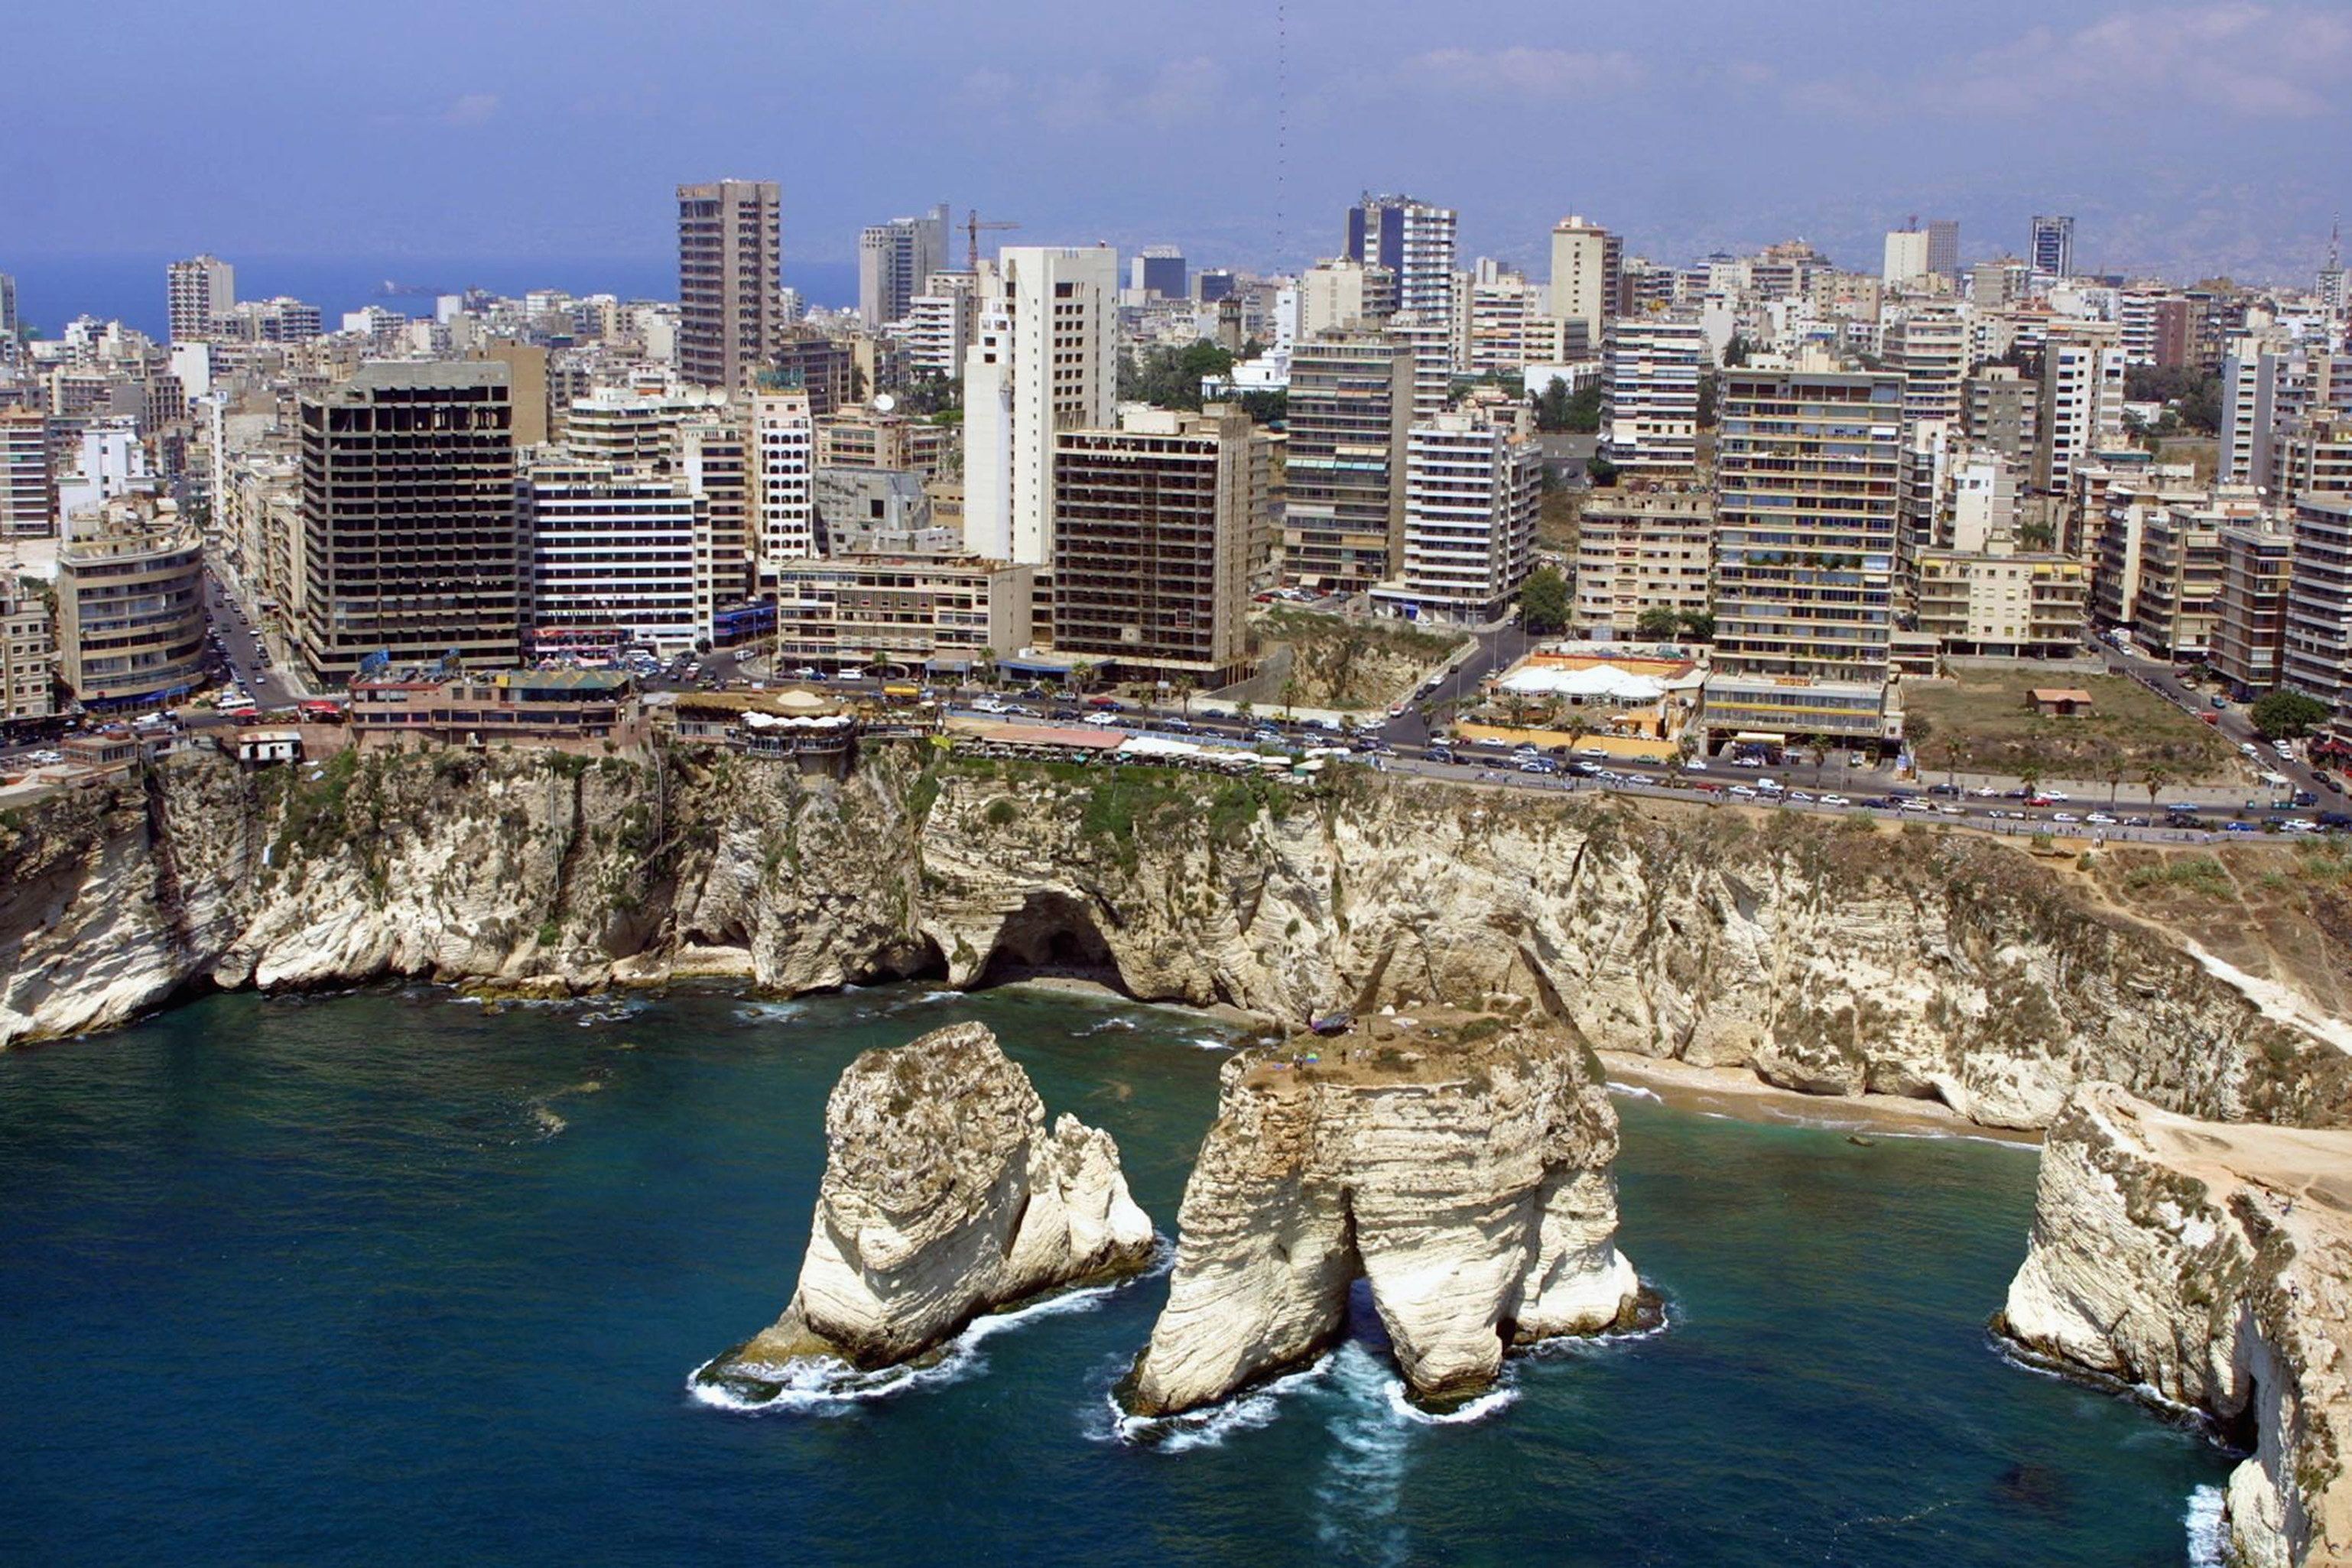 Beirut Lebanon city sightseeing, Cultural capital, Middle East travel, Architectural marvels, 3080x2060 HD Desktop